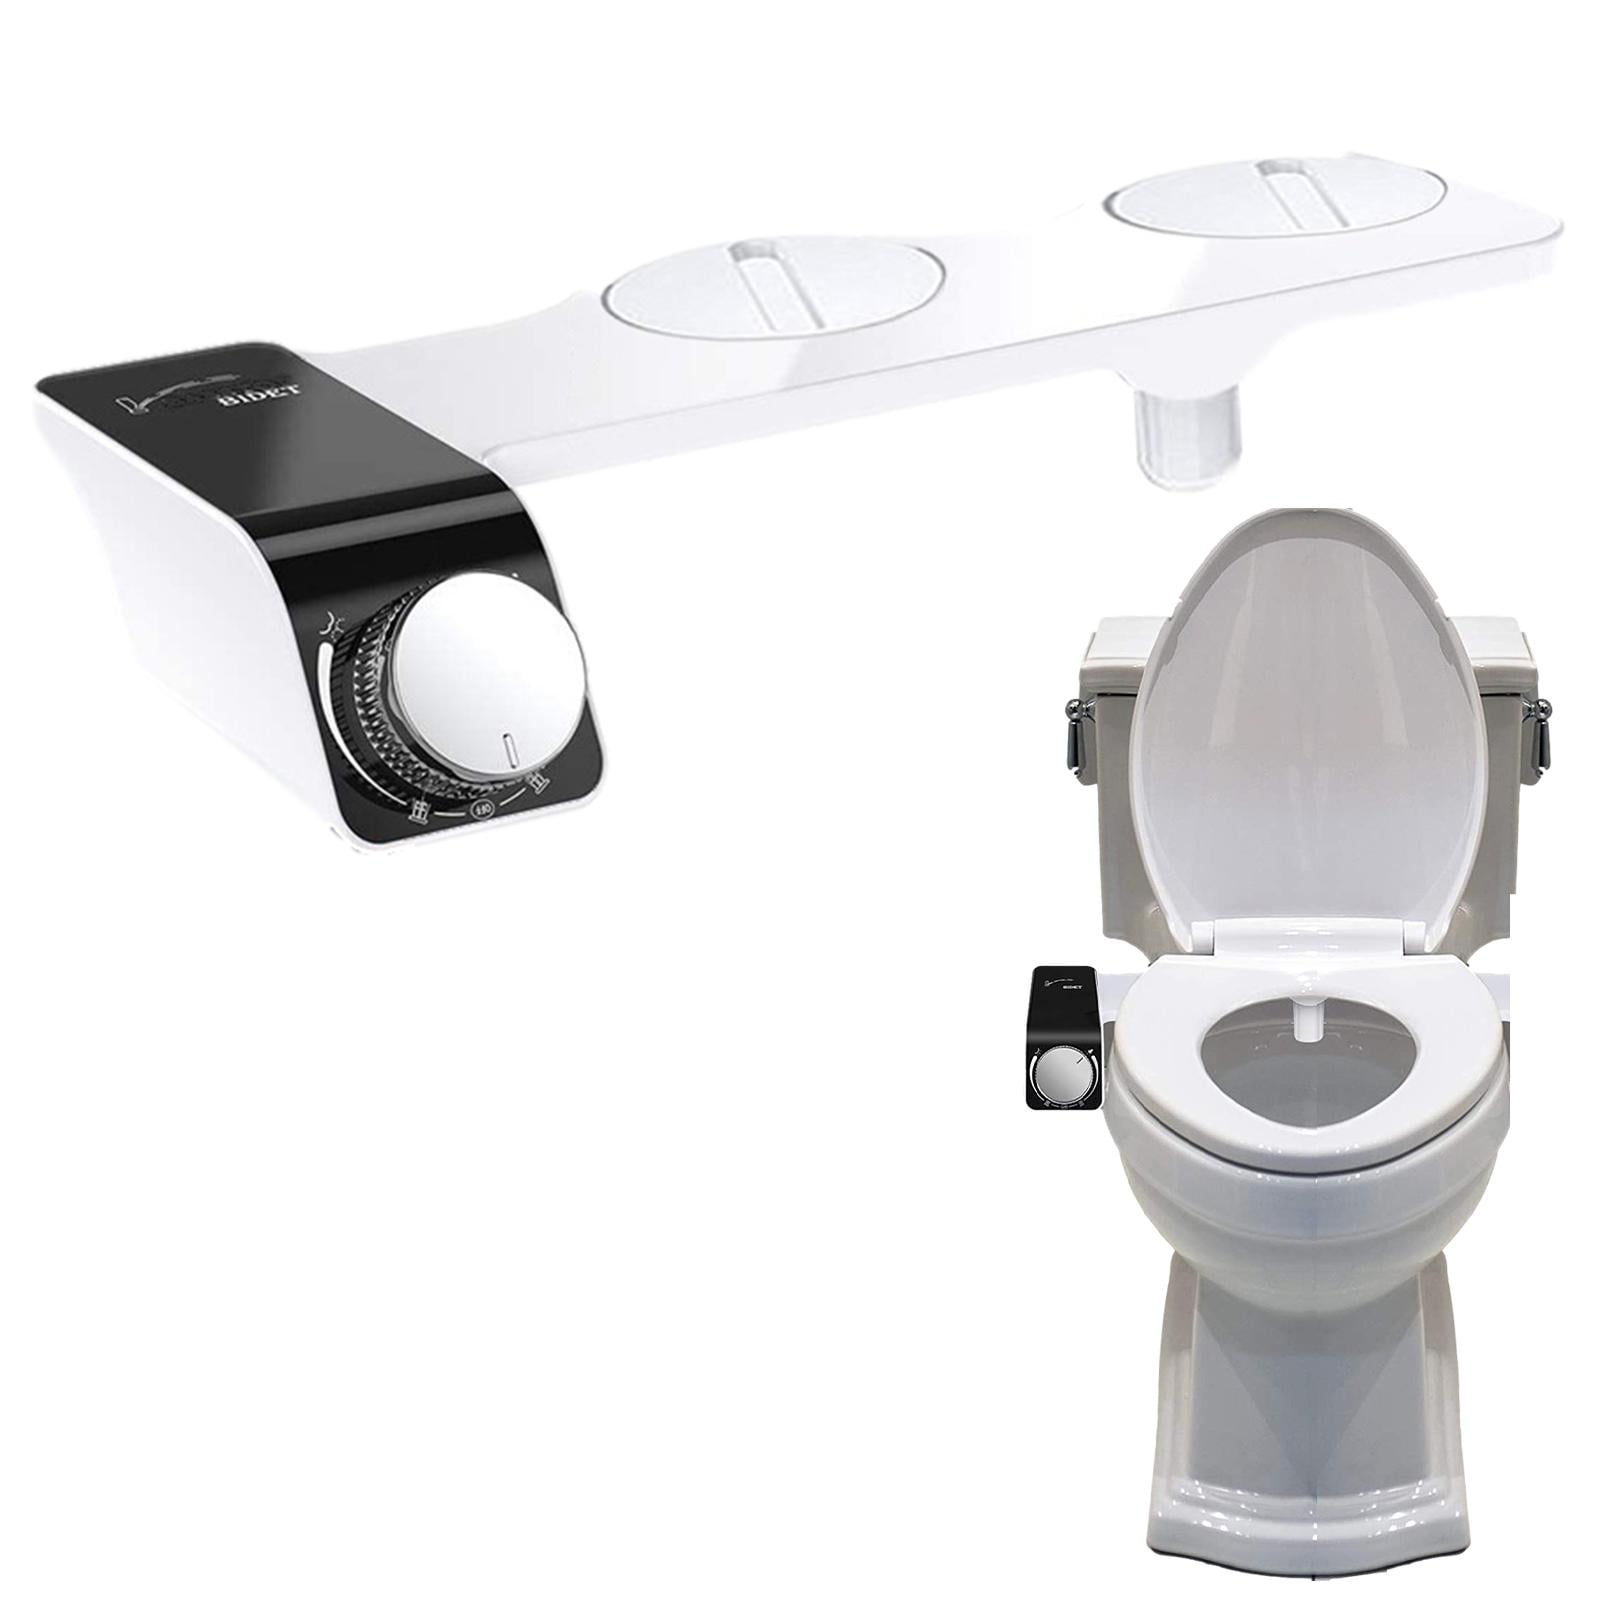 Attachment for Toilet | Classic and Bidet Toilet Seat Attachment | Easy Installation Washer Toilet Cover - Walmart.com